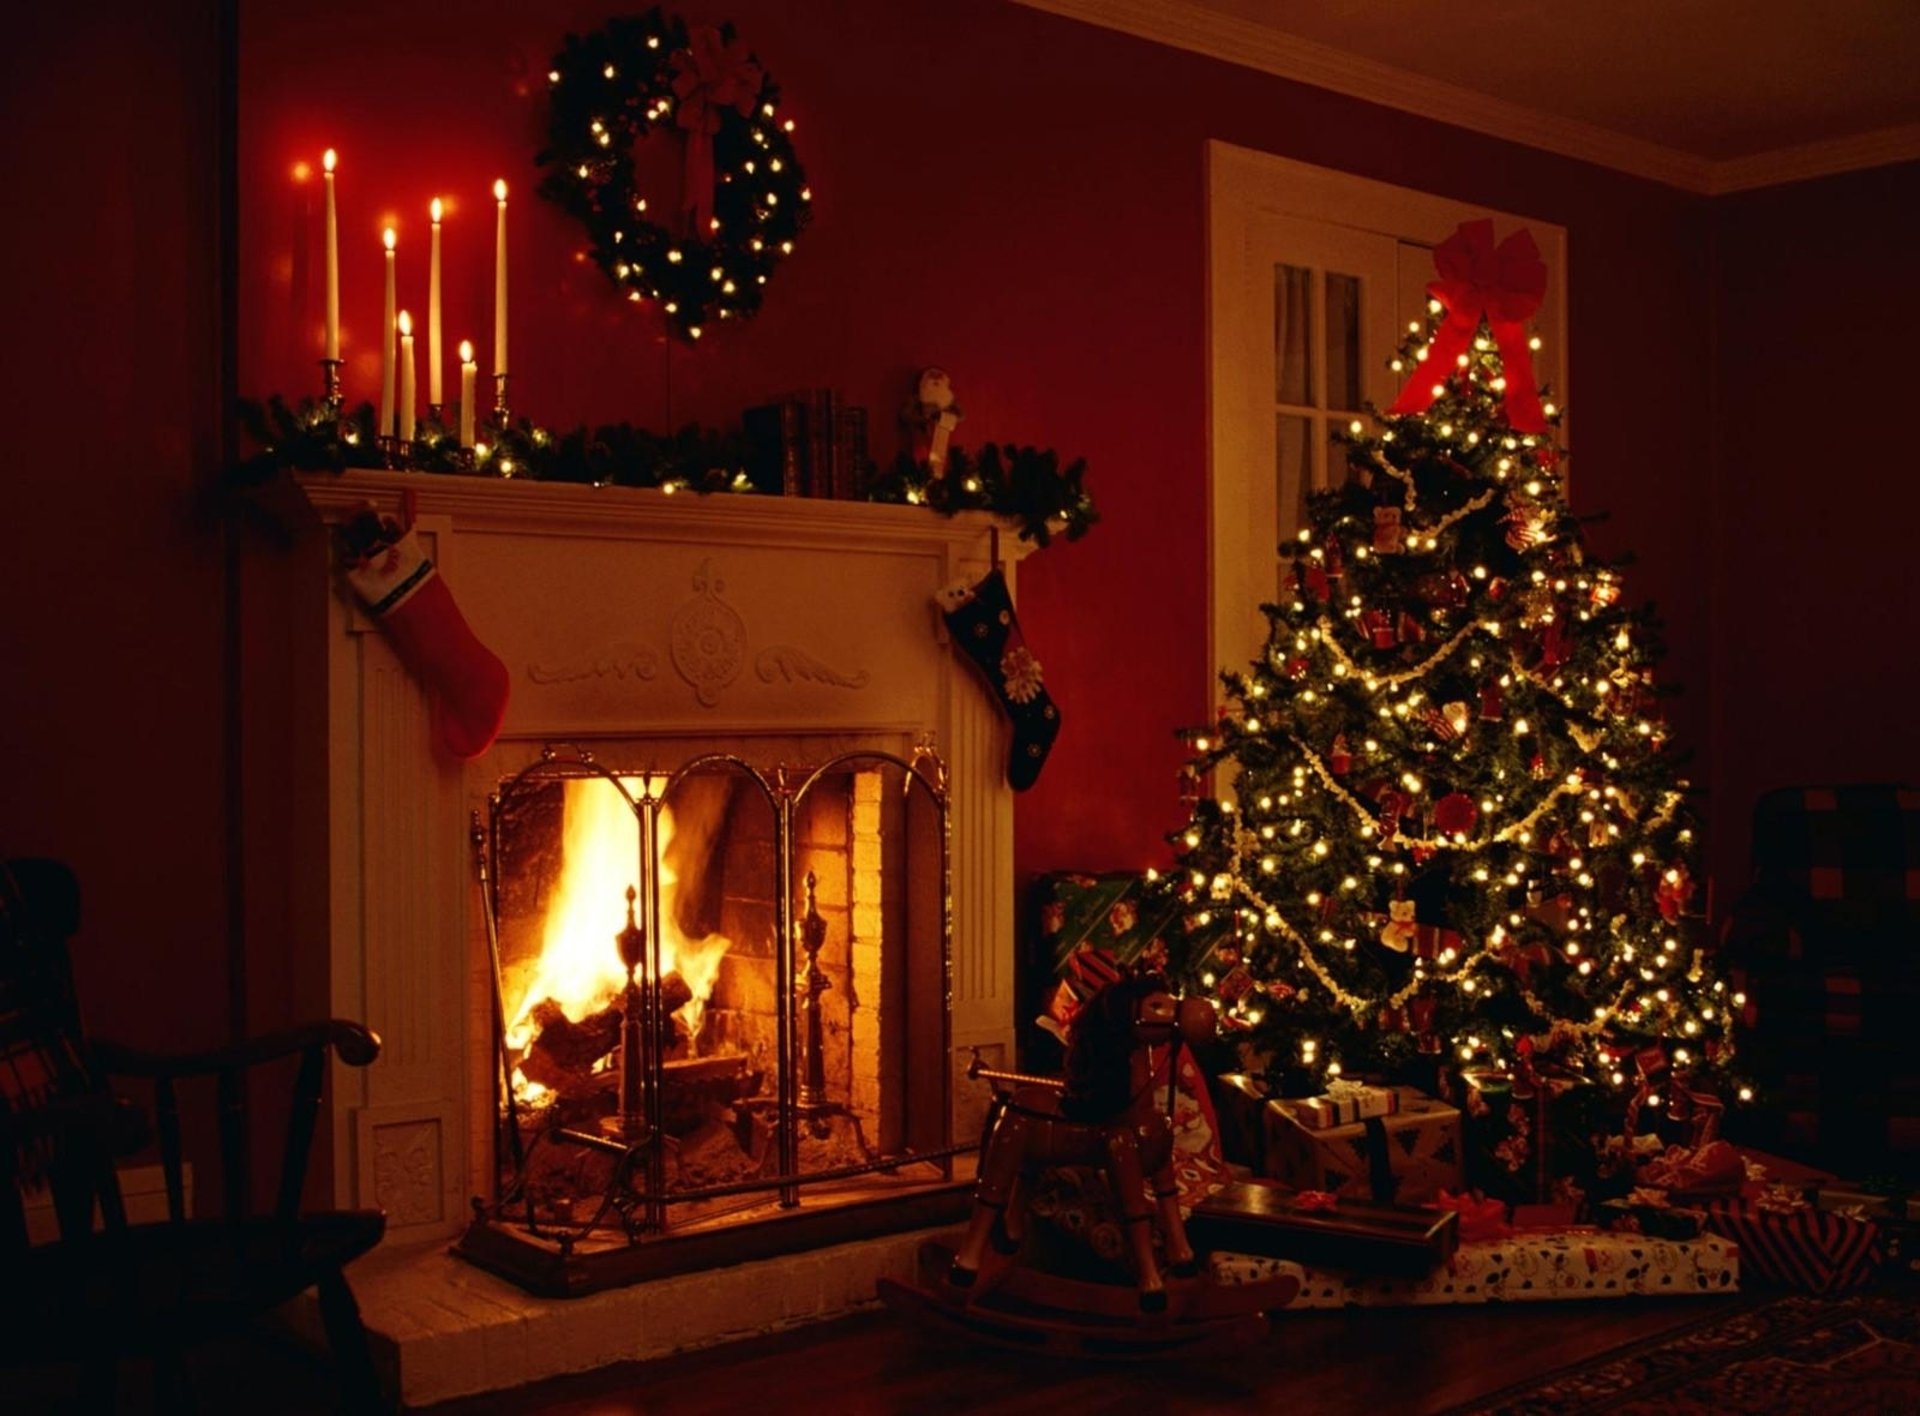 203891 Christmas Fireplace Fire Holiday Festive Decorations 